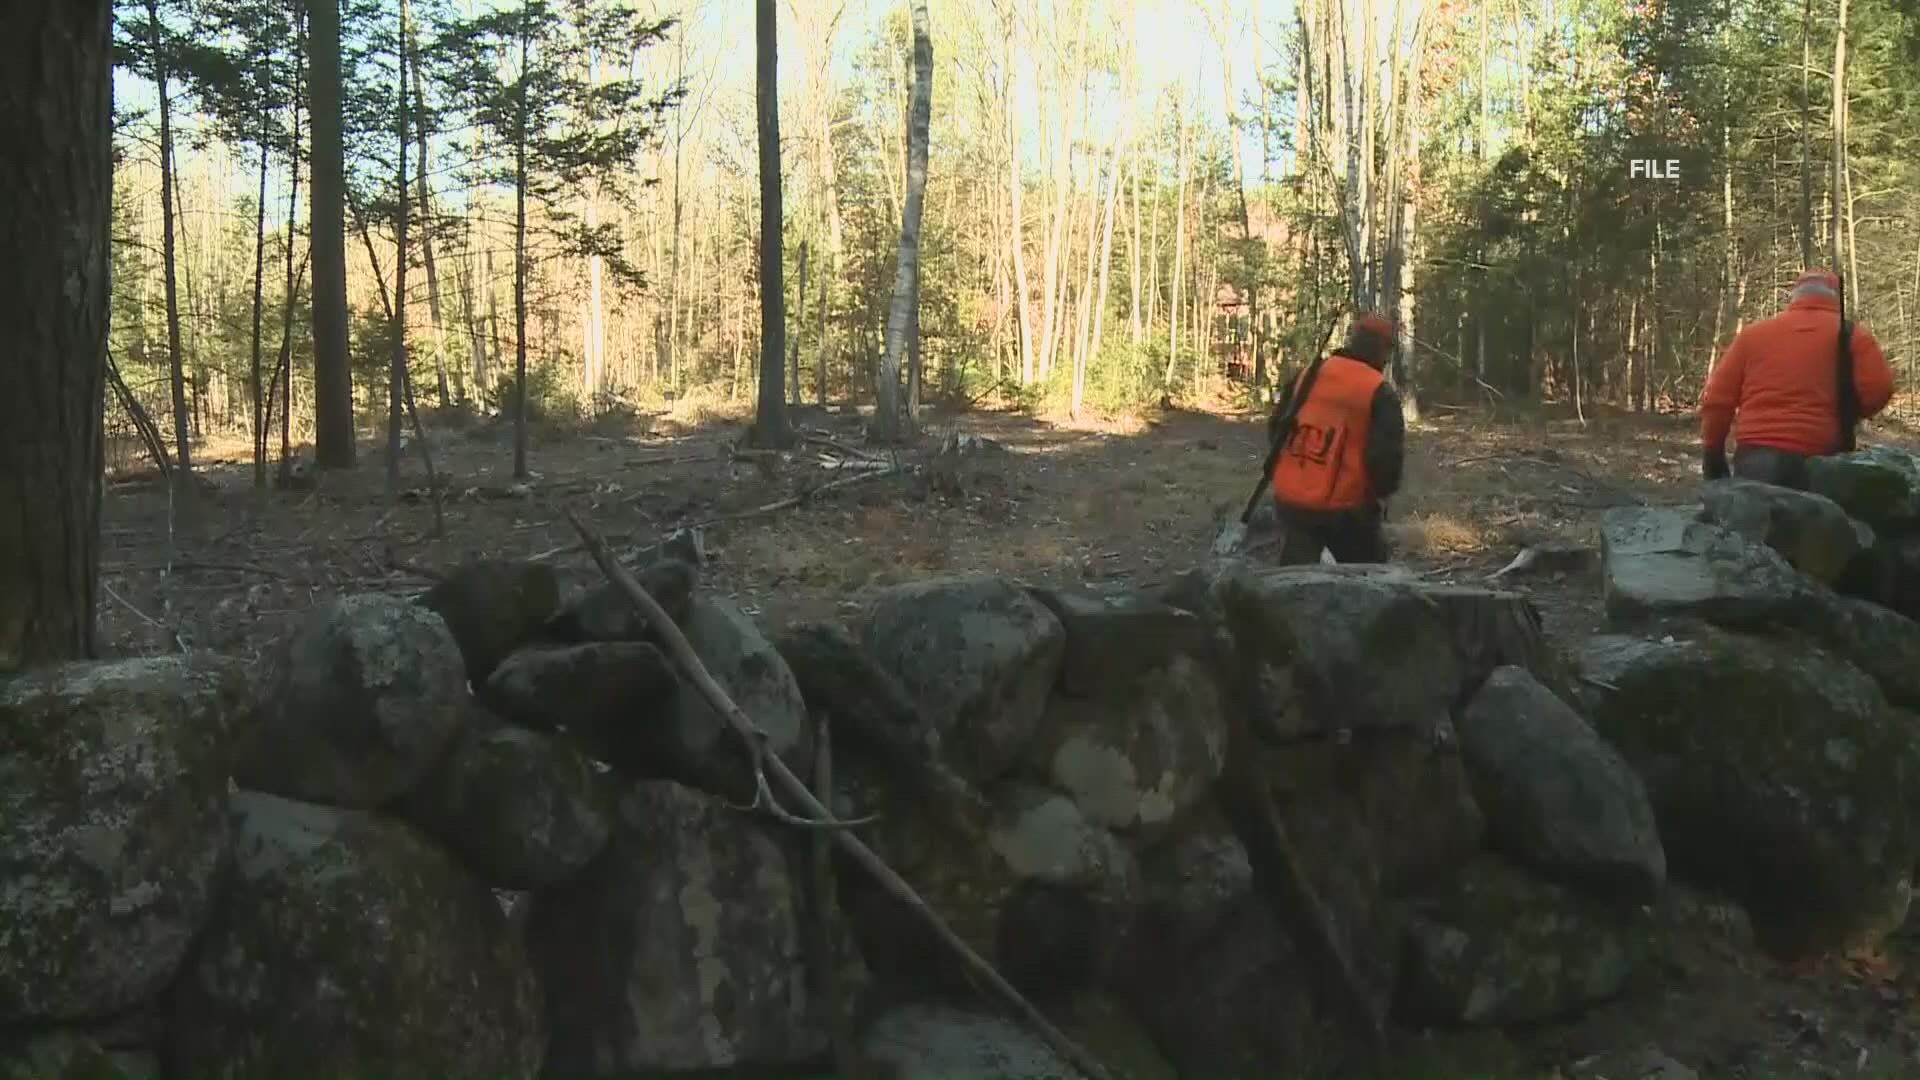 A bill to allow hunting on Sunday was voted down in the state legislature